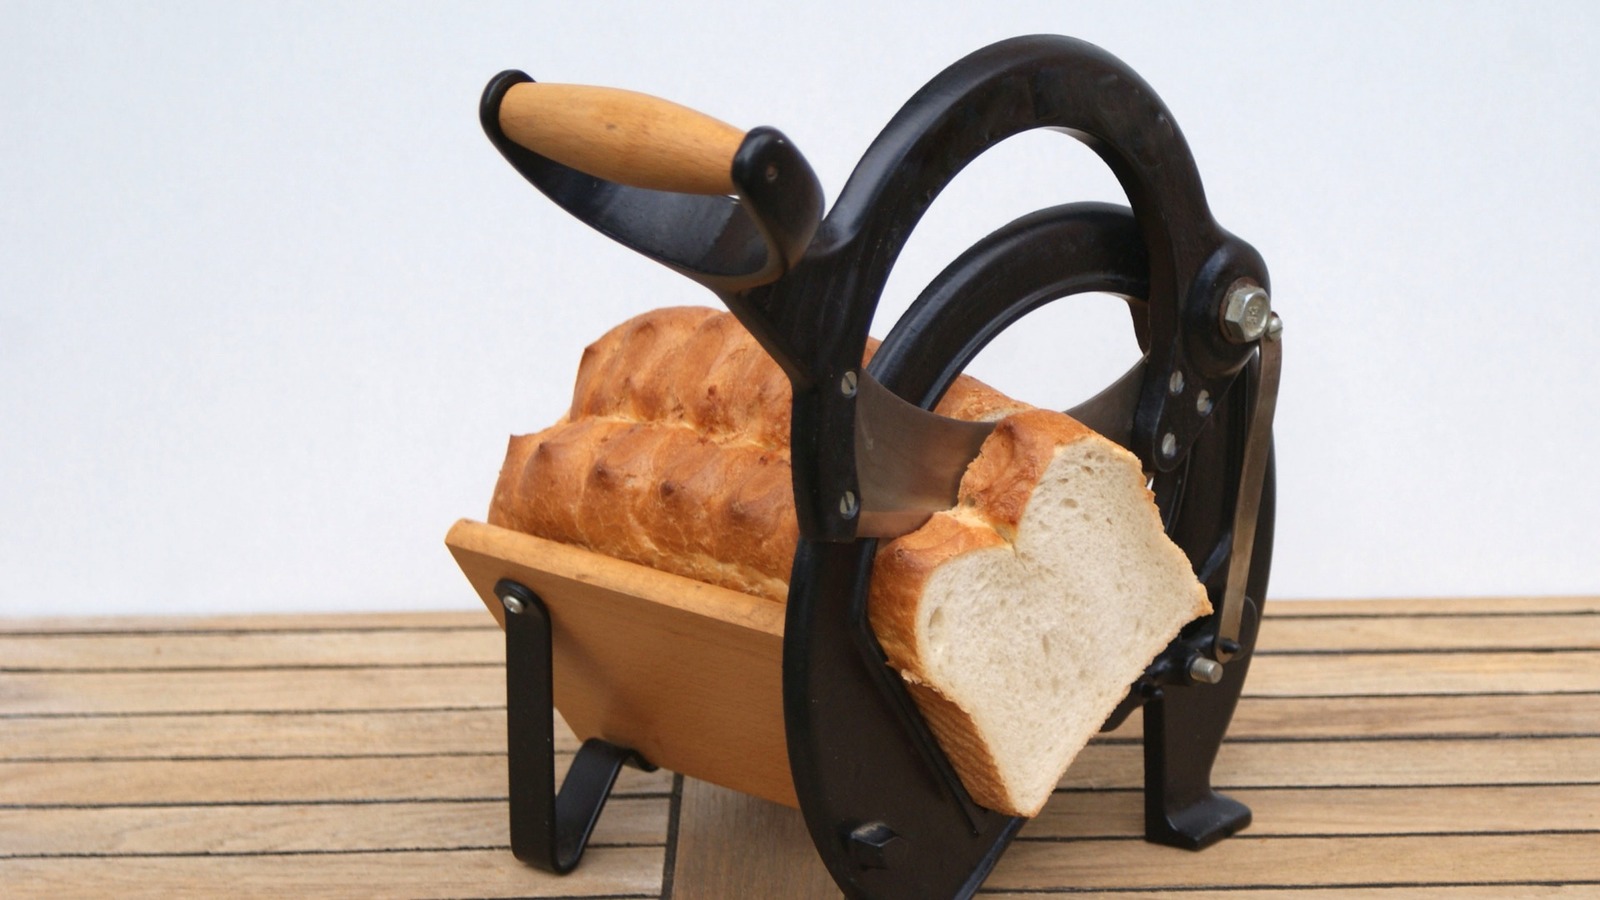 Bread Slicer For Homemade Bread Machine, Cutting Board And Slicer